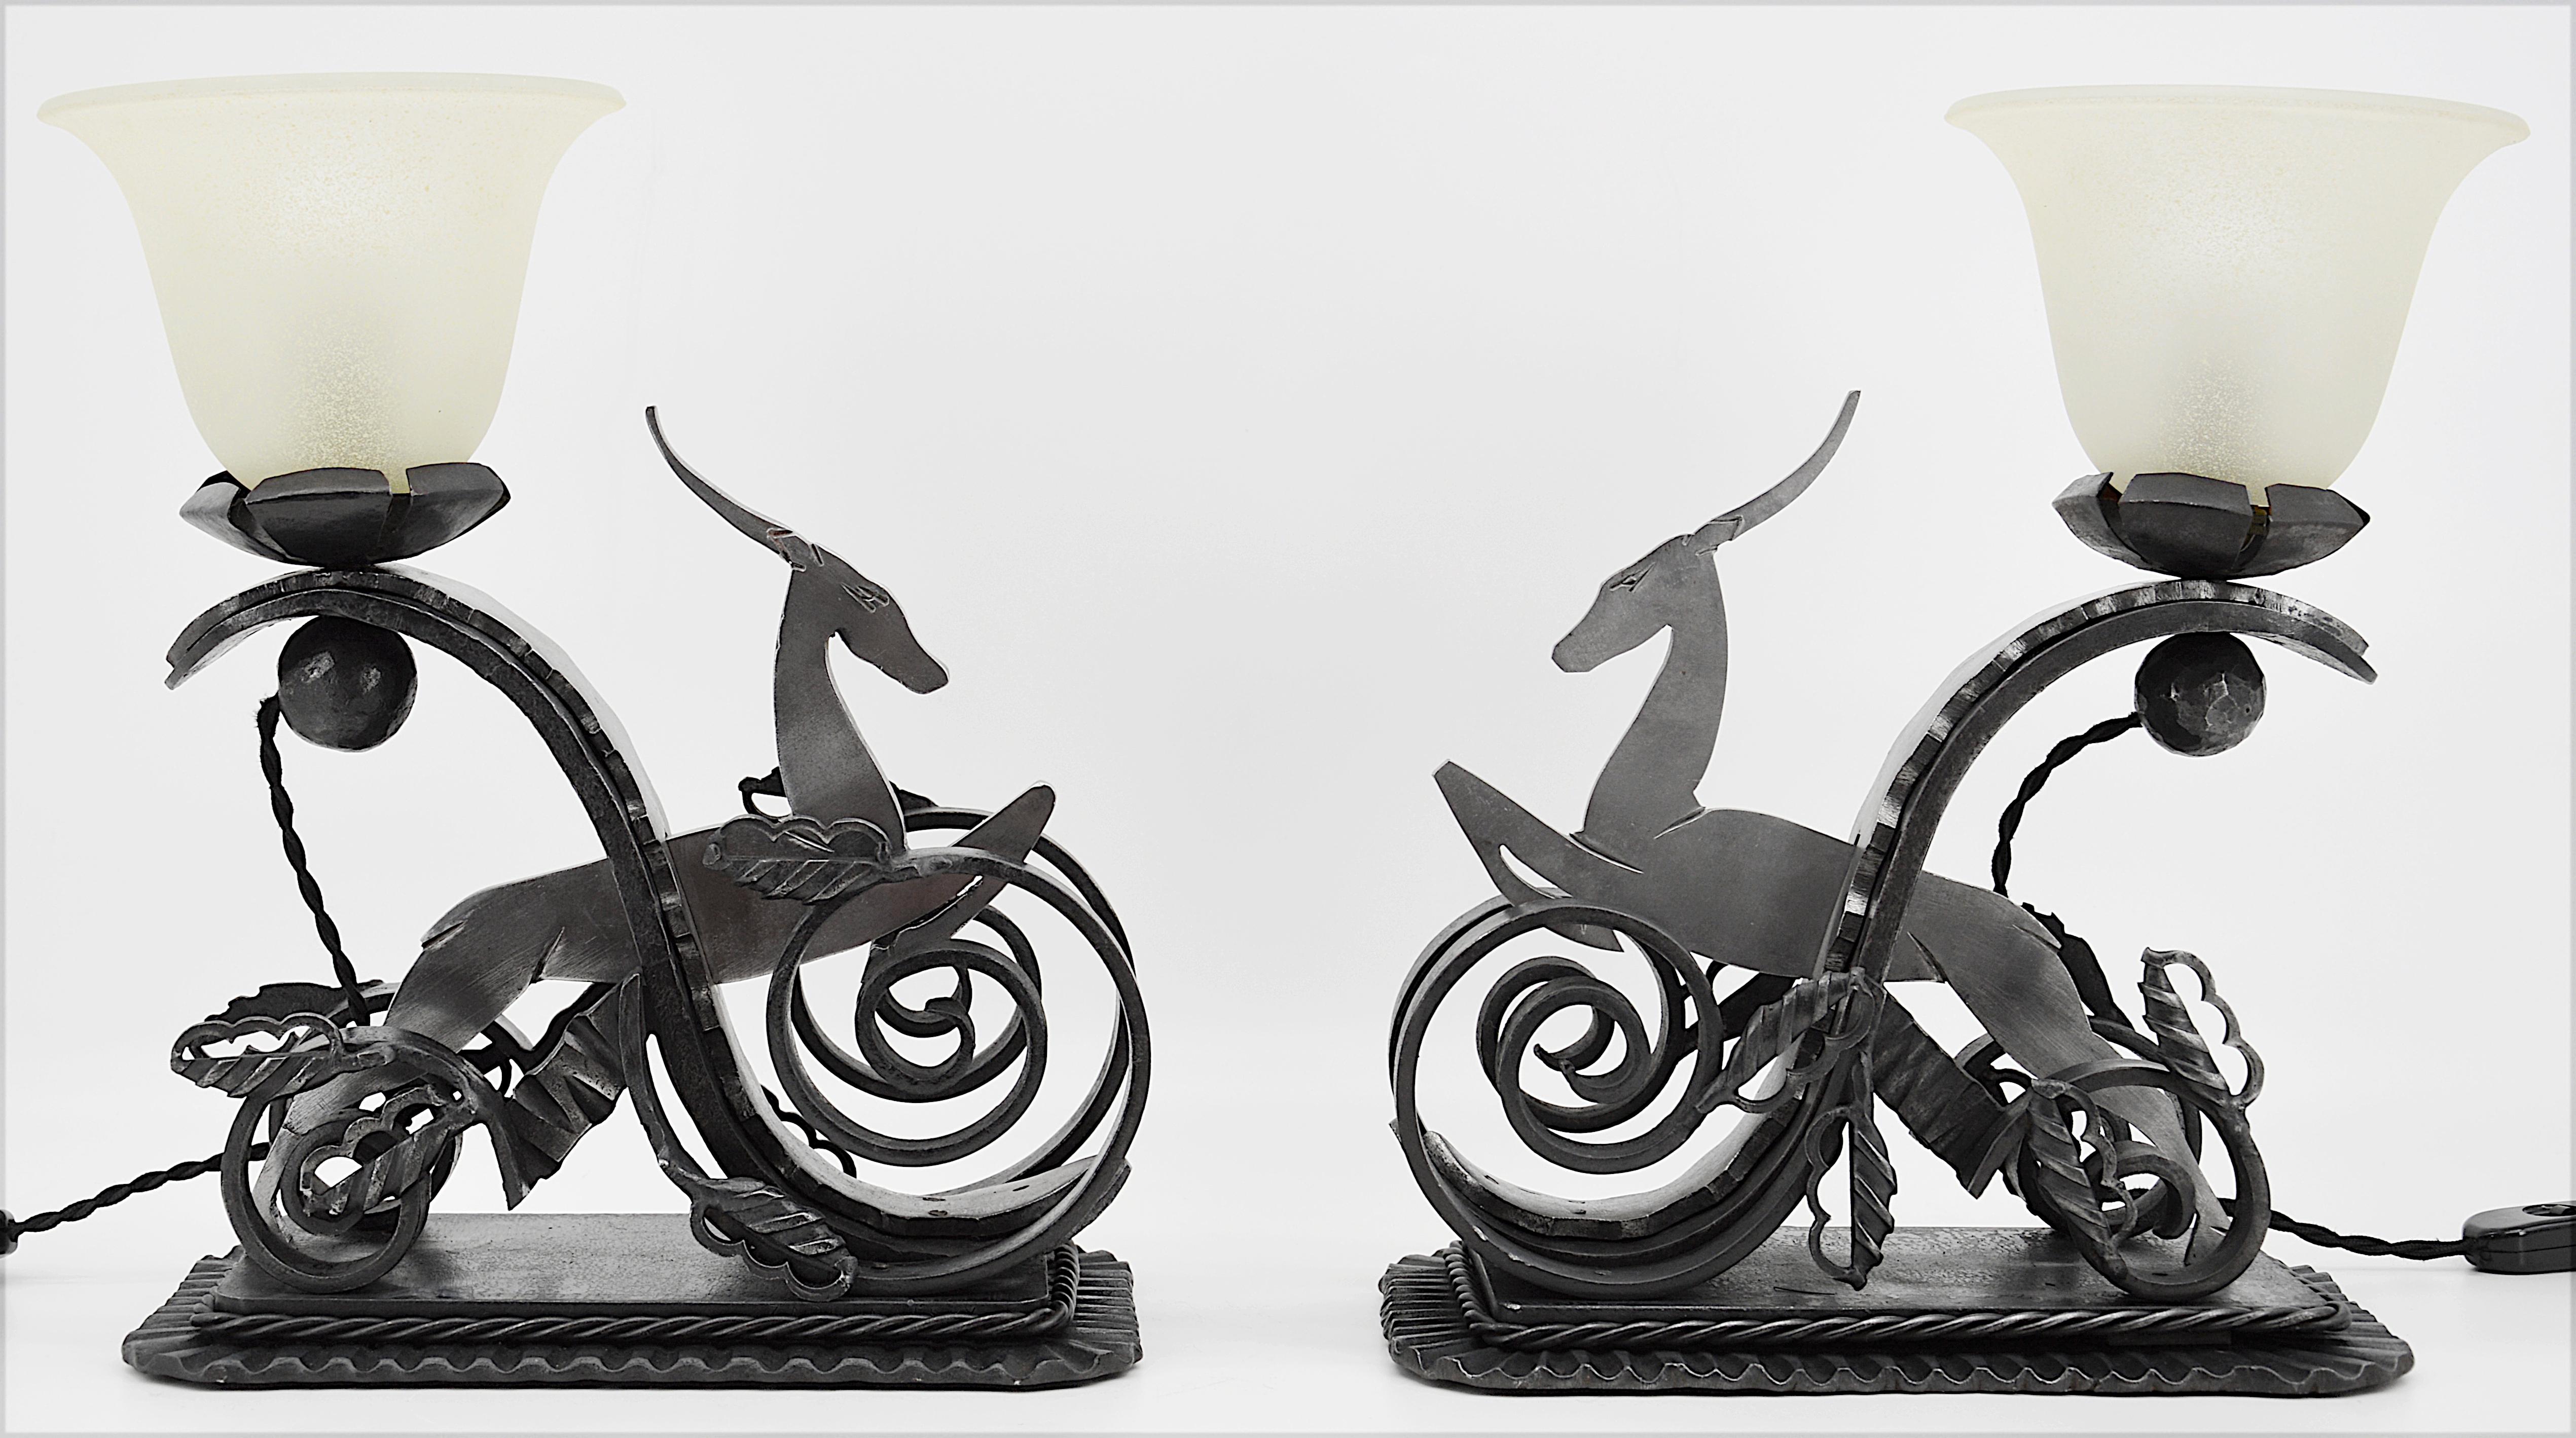 Pair of table lamps by Michel Zadounaisky, France, 1930s. Partially black patinated wrought iron antelopes. Measurements: Each-length 10.2